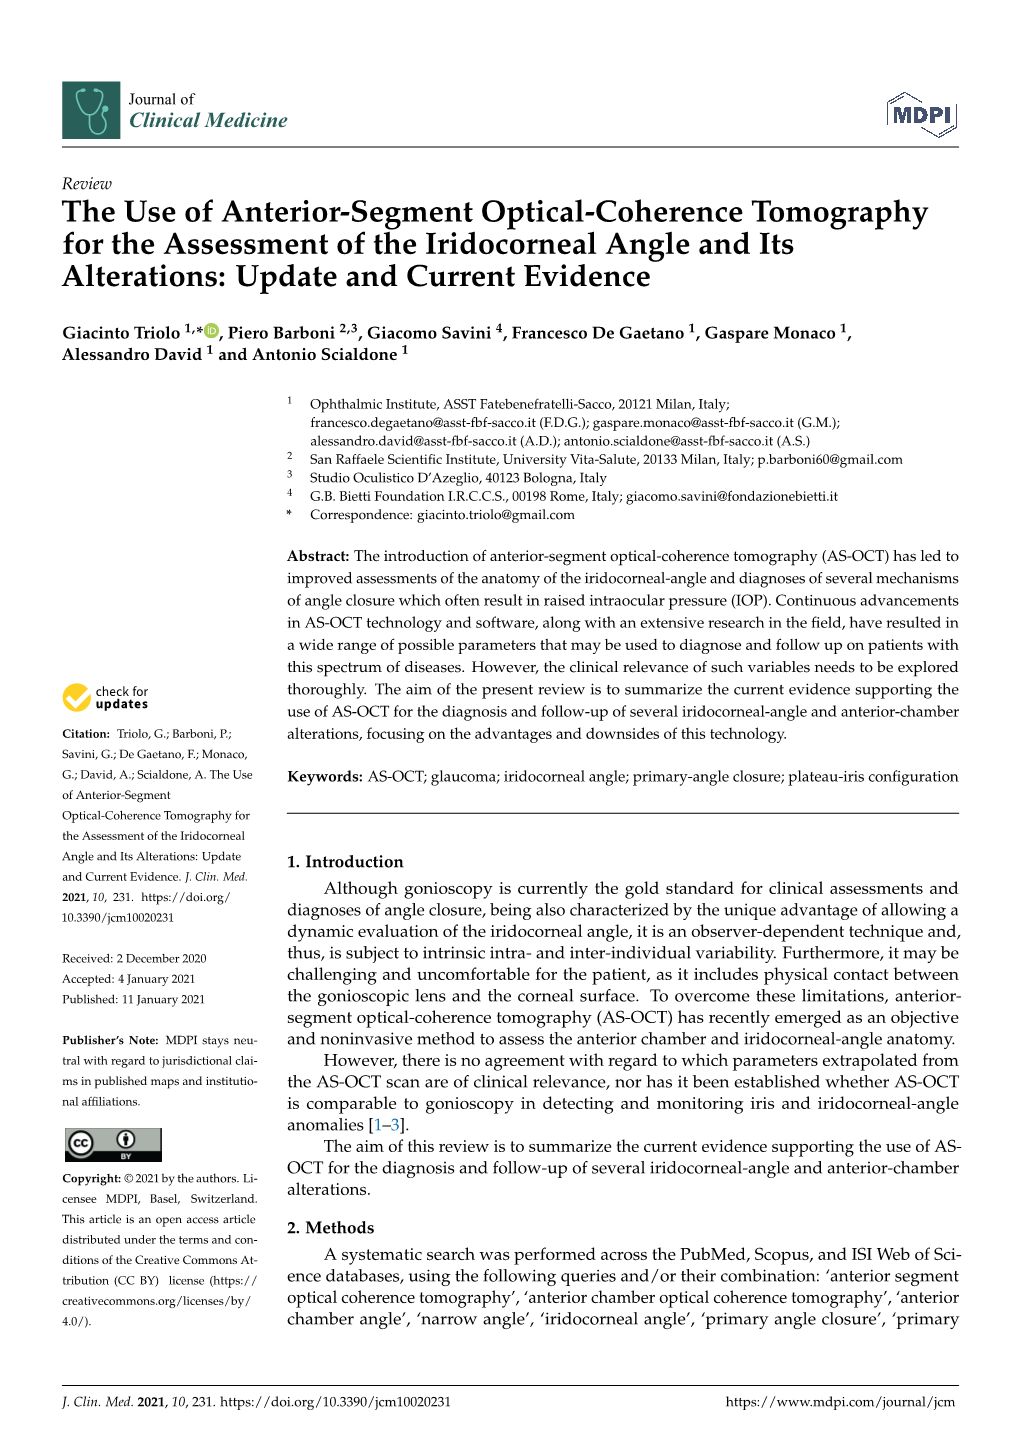 The Use of Anterior-Segment Optical-Coherence Tomography for the Assessment of the Iridocorneal Angle and Its Alterations: Update and Current Evidence